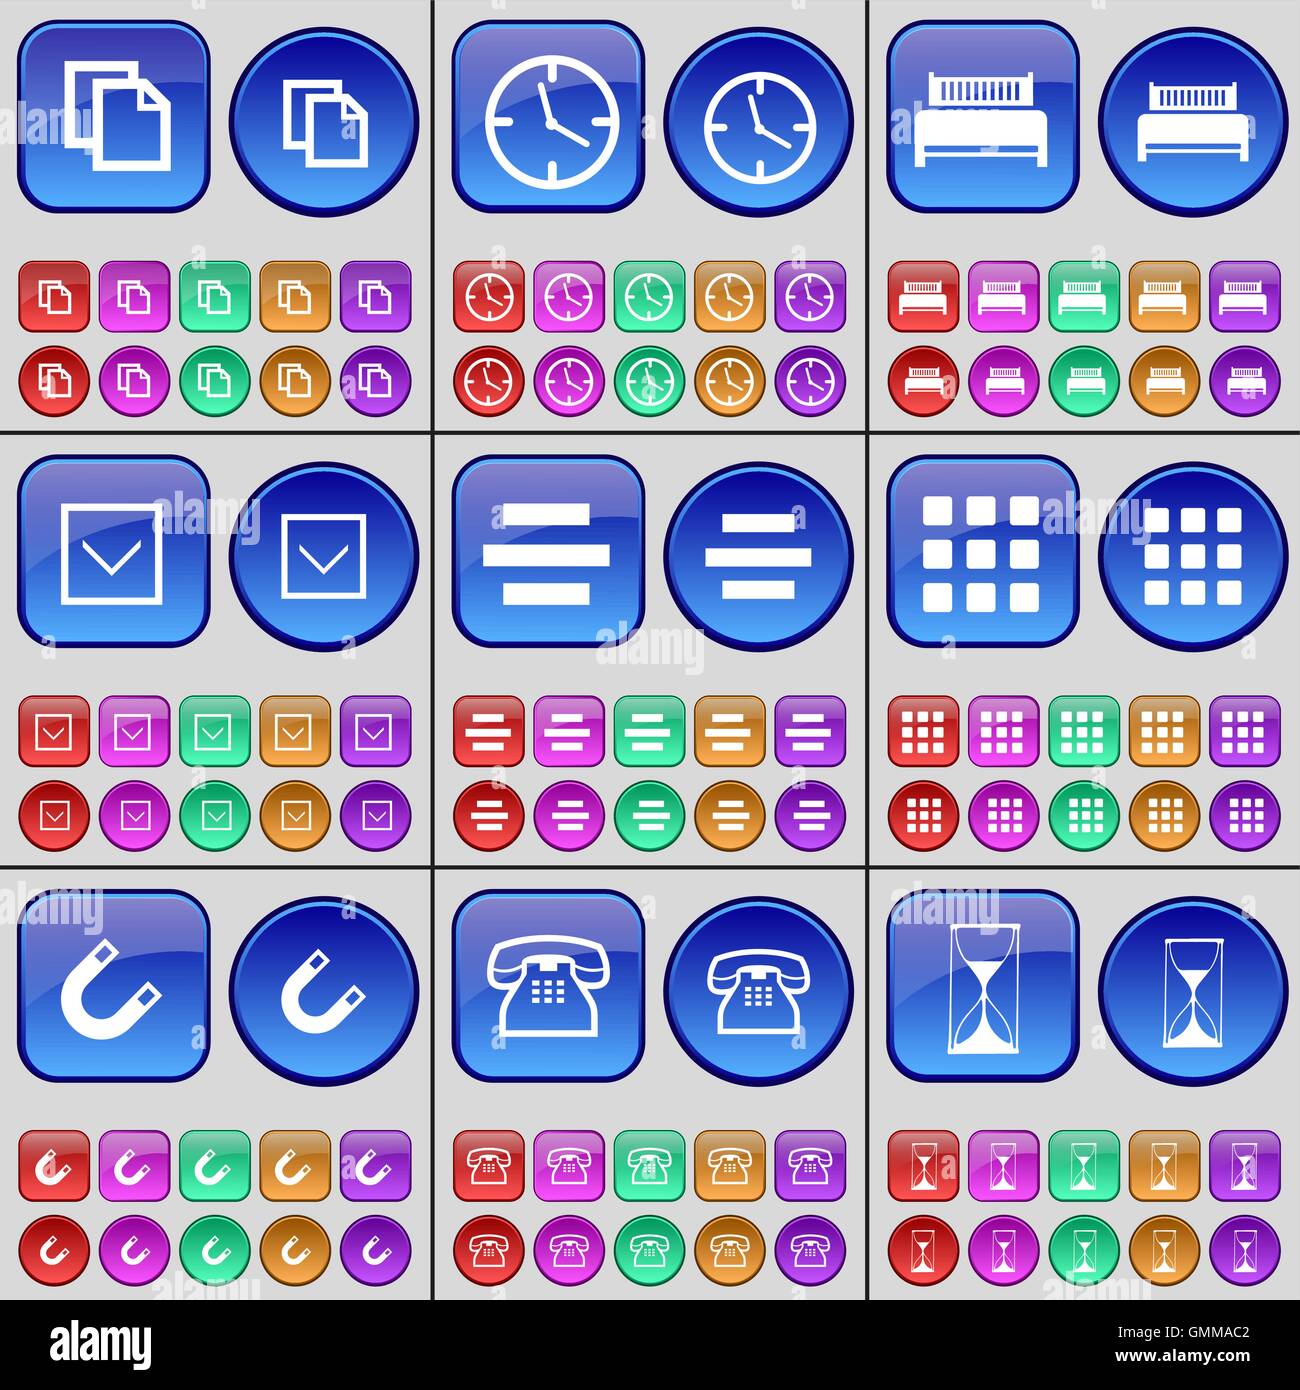 Copy, Clock, Bed, Arrow down, List, Apps, Magnet, Phone, Hourglass. A large set of multi-colored buttons. Vector Stock Vector